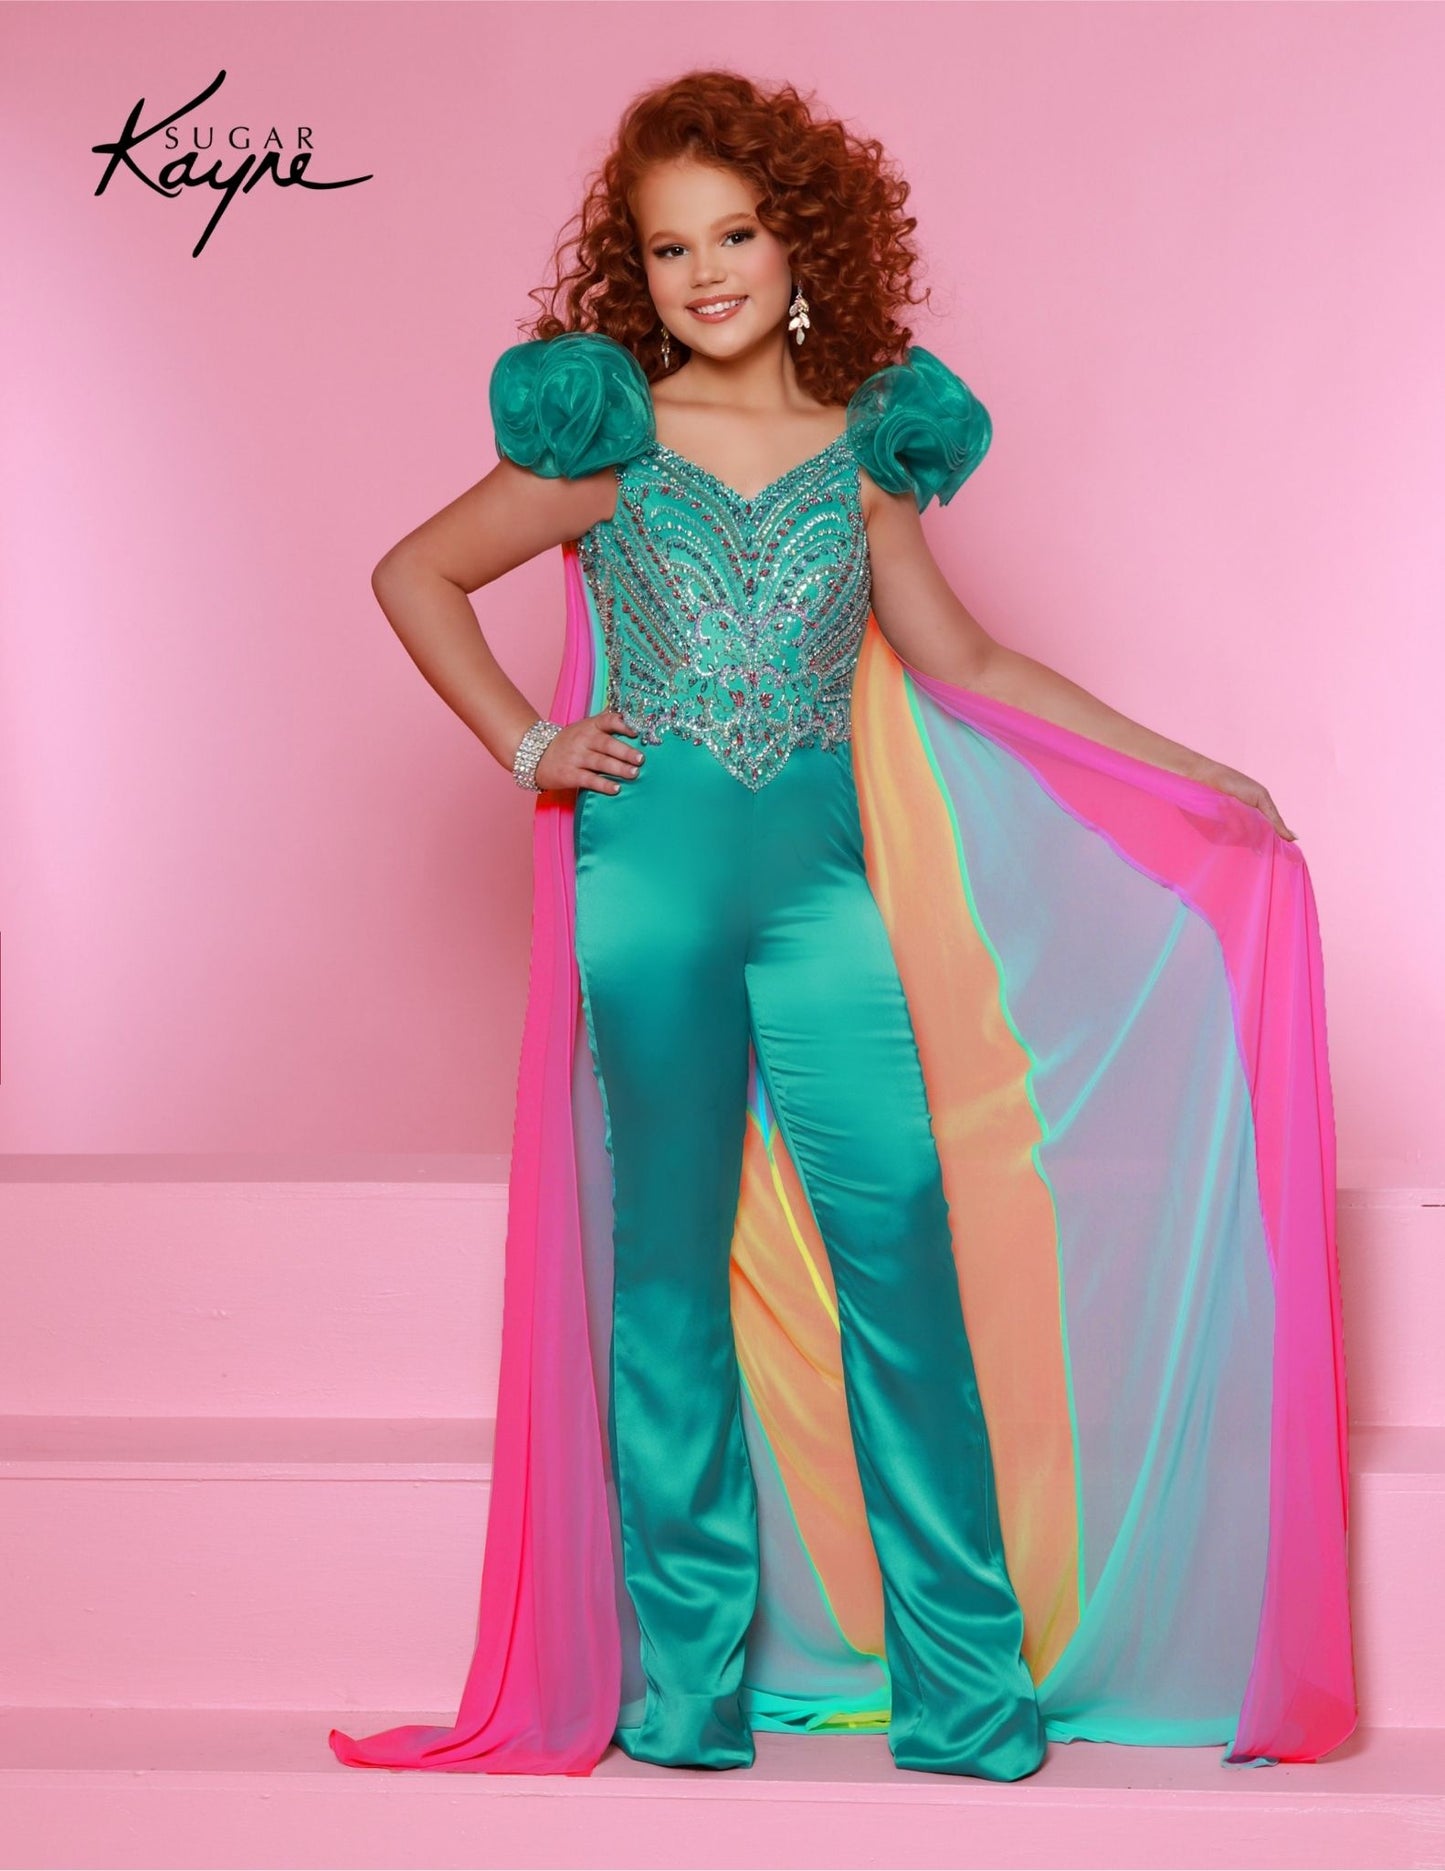 The Sugar Kayne C335 Girls Two Piece Fun Fashion Jumpsuit features a beaded bodice, a detachable cape, and a stylish, comfortable fit. Perfect for pageants, the outfit is sure to make your child look her best. Step into a whirlwind of whimsy with this Crepe Back Satin Jumpsuit. The beaded bodice, ruffle sleeves, and detachable colorful chiffon cape make every day a playful and stylish adventure.